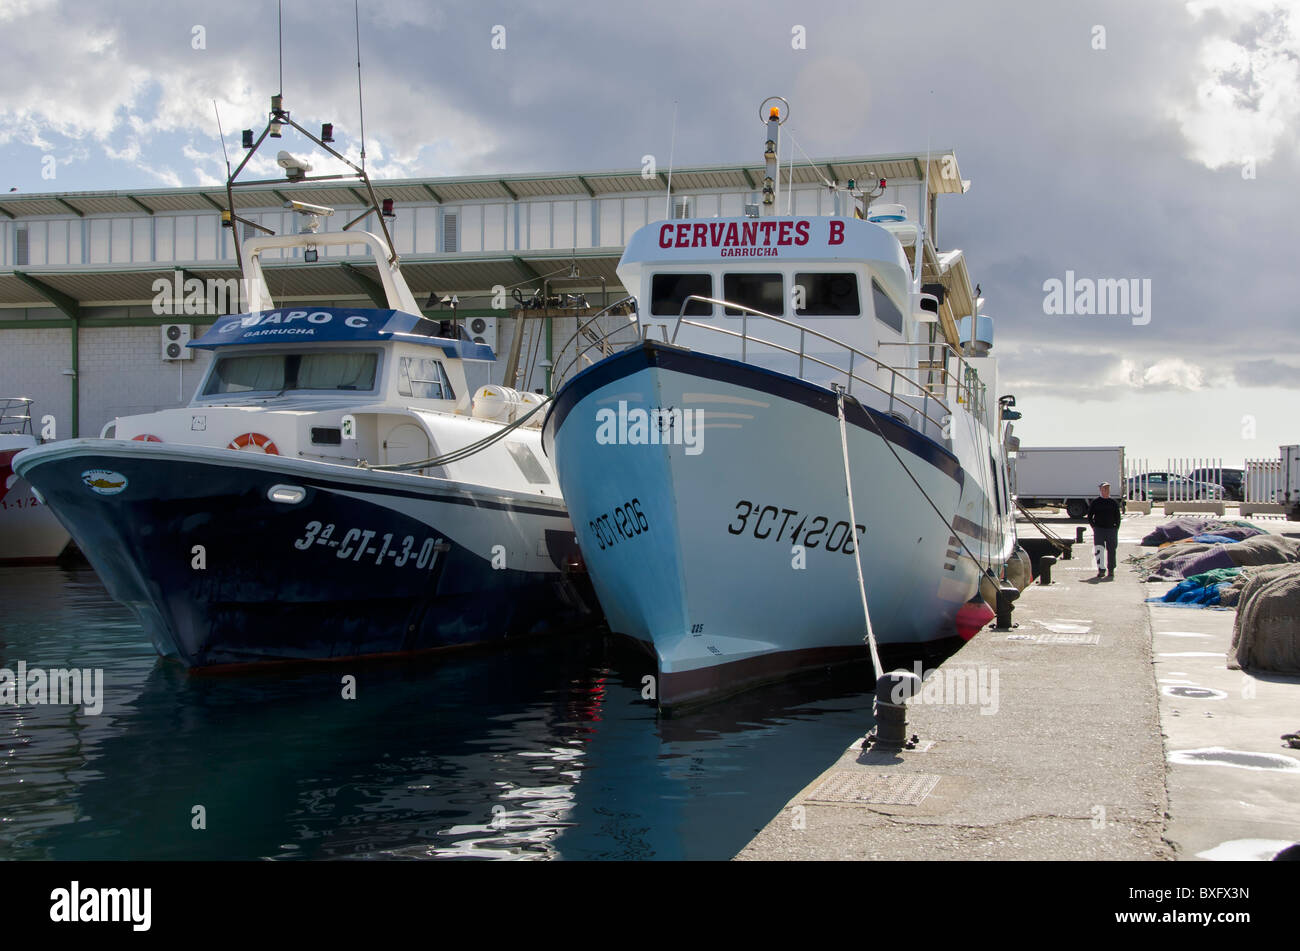 Fishing Boats in Garrucha harbour, Spain on a Sunday lunchtime. Two boats are moored side by side in the harbour and a man is walking past. Stock Photo